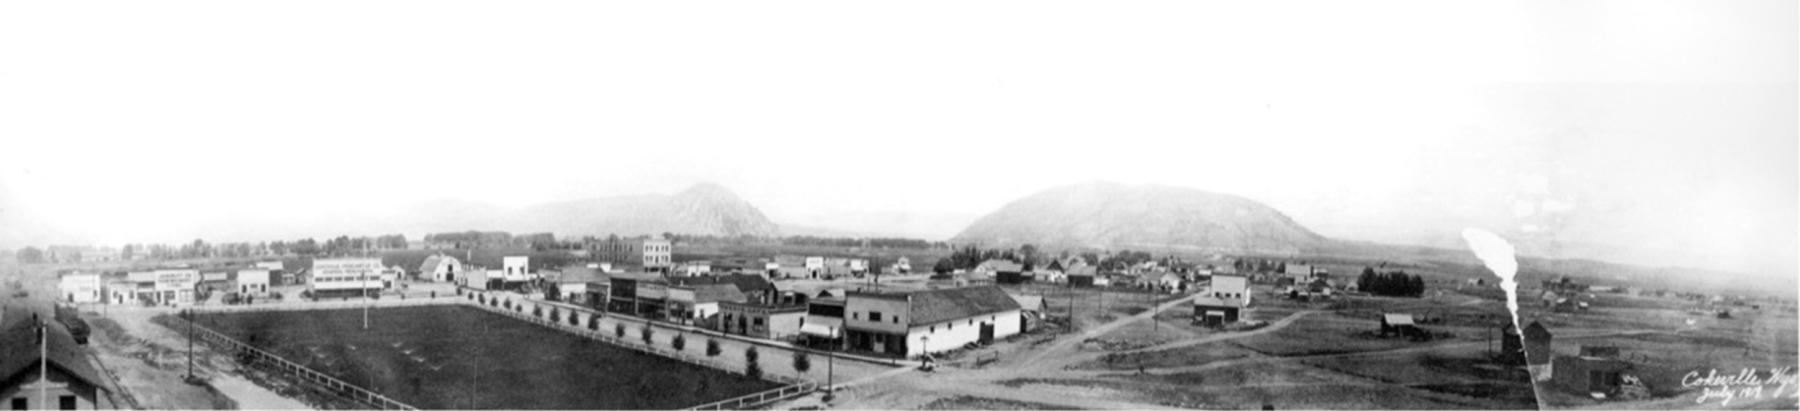 Cokeville, July 1919. Between 1908 and 1919, business boomed and the town built a large new school building, paved roads, added sidewalks and installed electric lights. Wyoming State Archives.